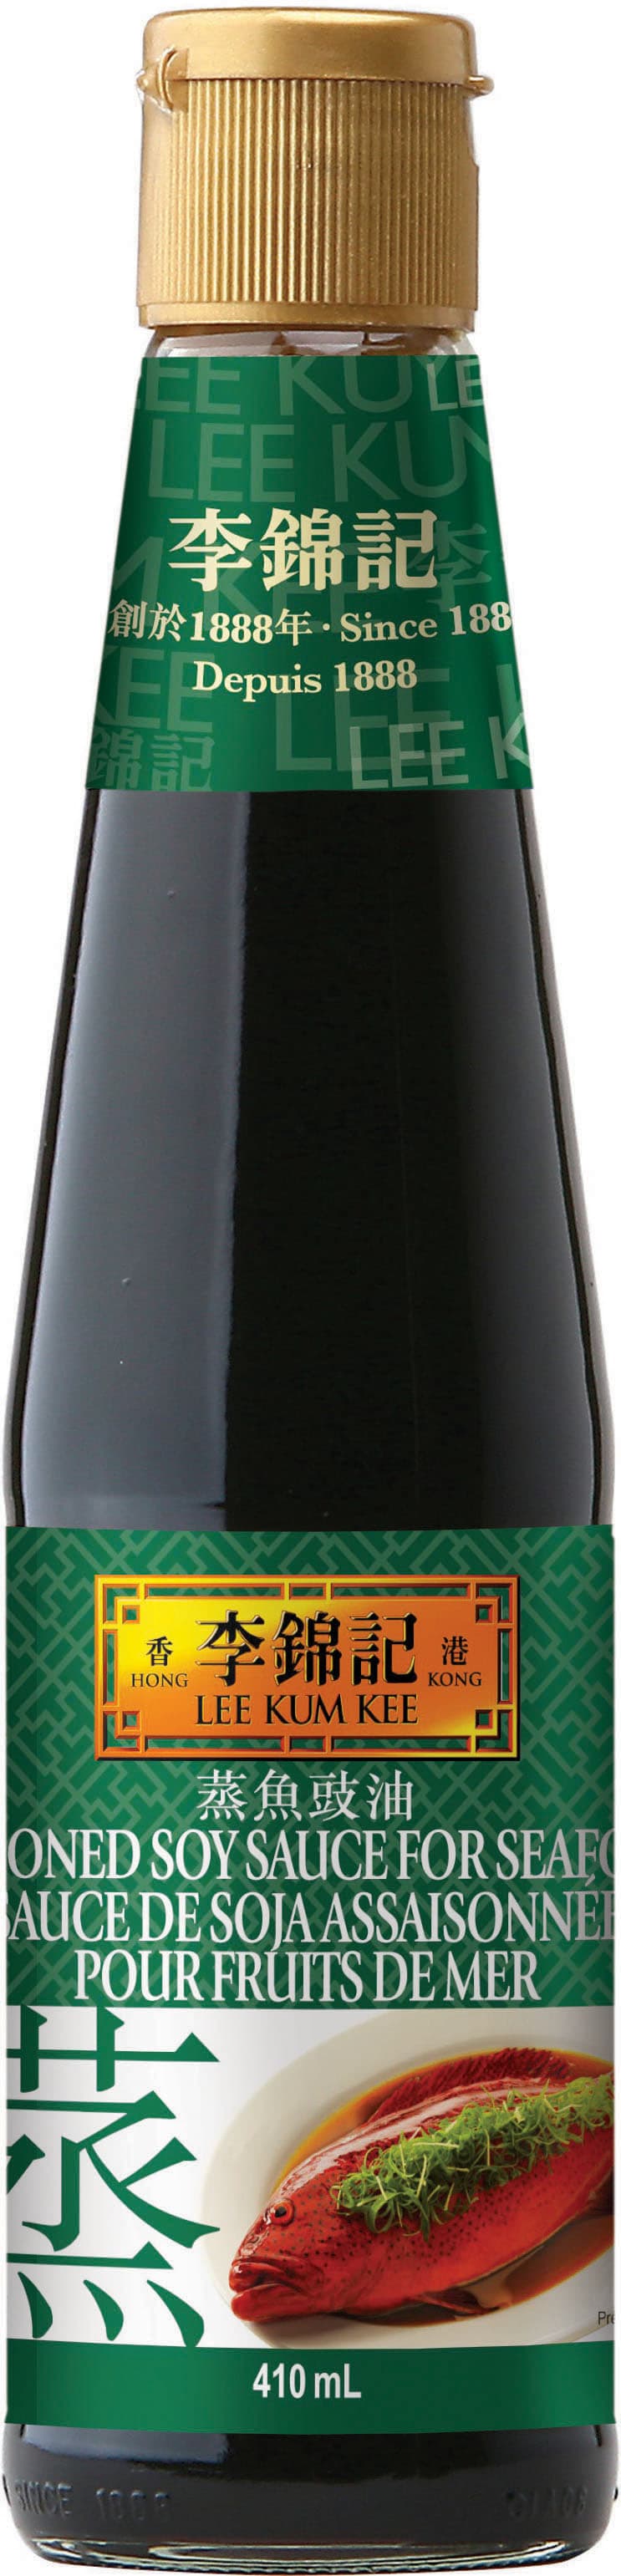 Seasoned Soy Sauce for Seafood 410ml 